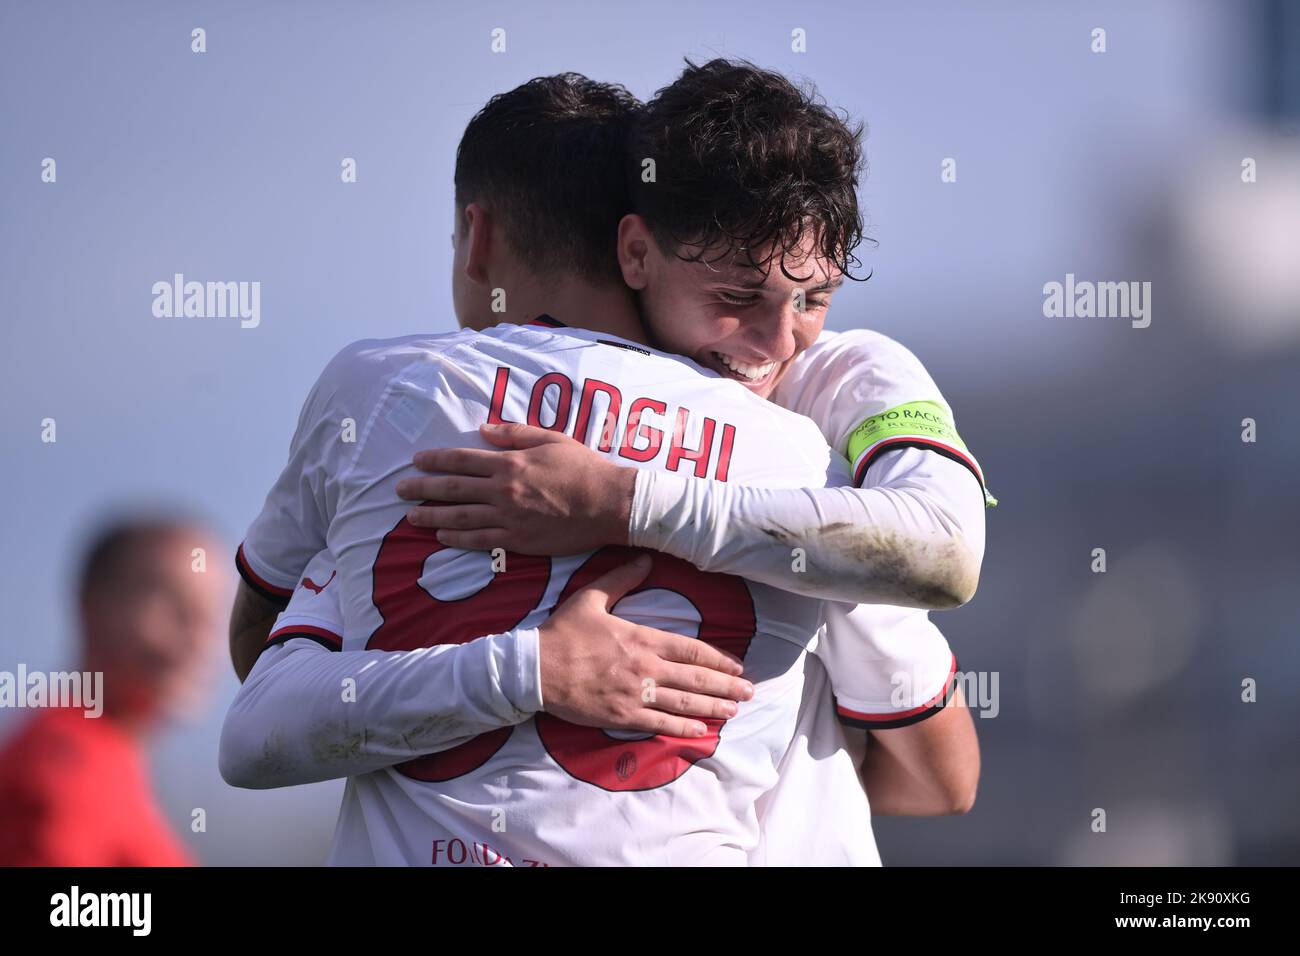 Jordan Longhi and Gabriele Alesi of AC Milan celebrates after scoring the  goal during the UEFA Youth League Group E match between Dinamo Zagreb and  AC Milan at Stadion Zagreb on October